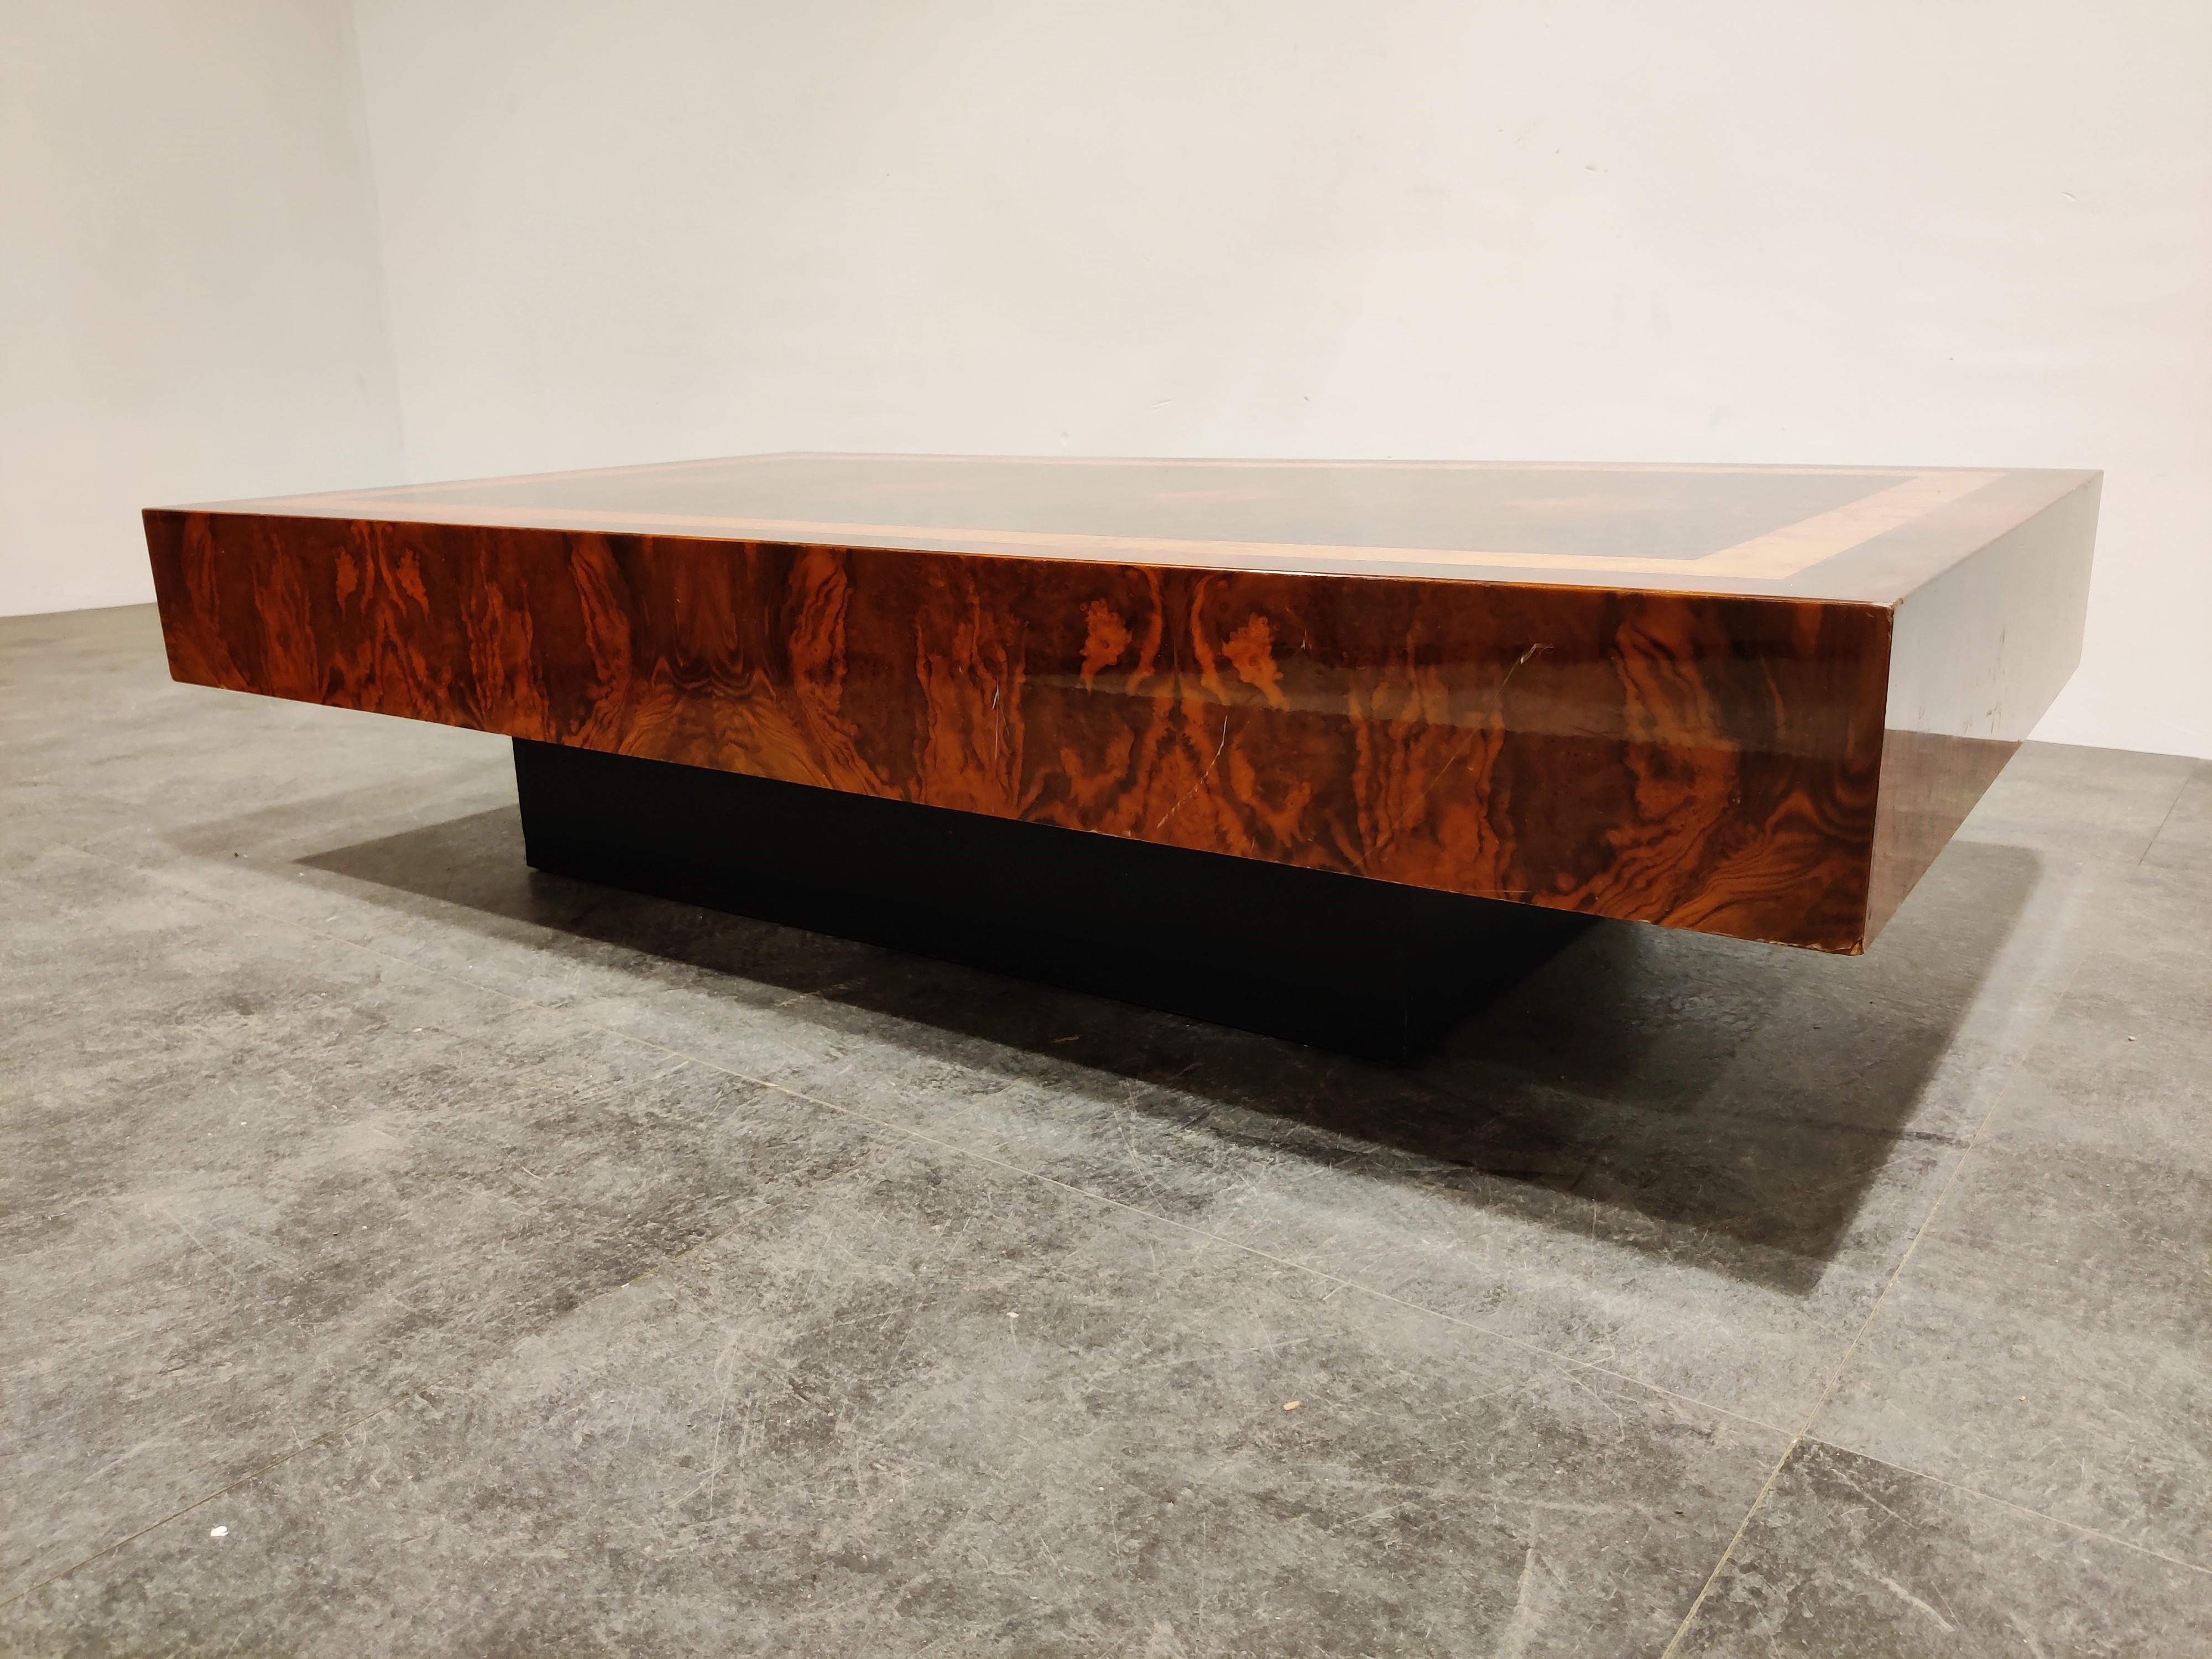 Rectangular burl wood coffee table.

Very lovely seventies/eighties glam look thanks to the burl veneer.

Black wooden base.

Condition: Age related wear, some scratching,

1970s, France

Dimensions:
Height 30cm/11.77